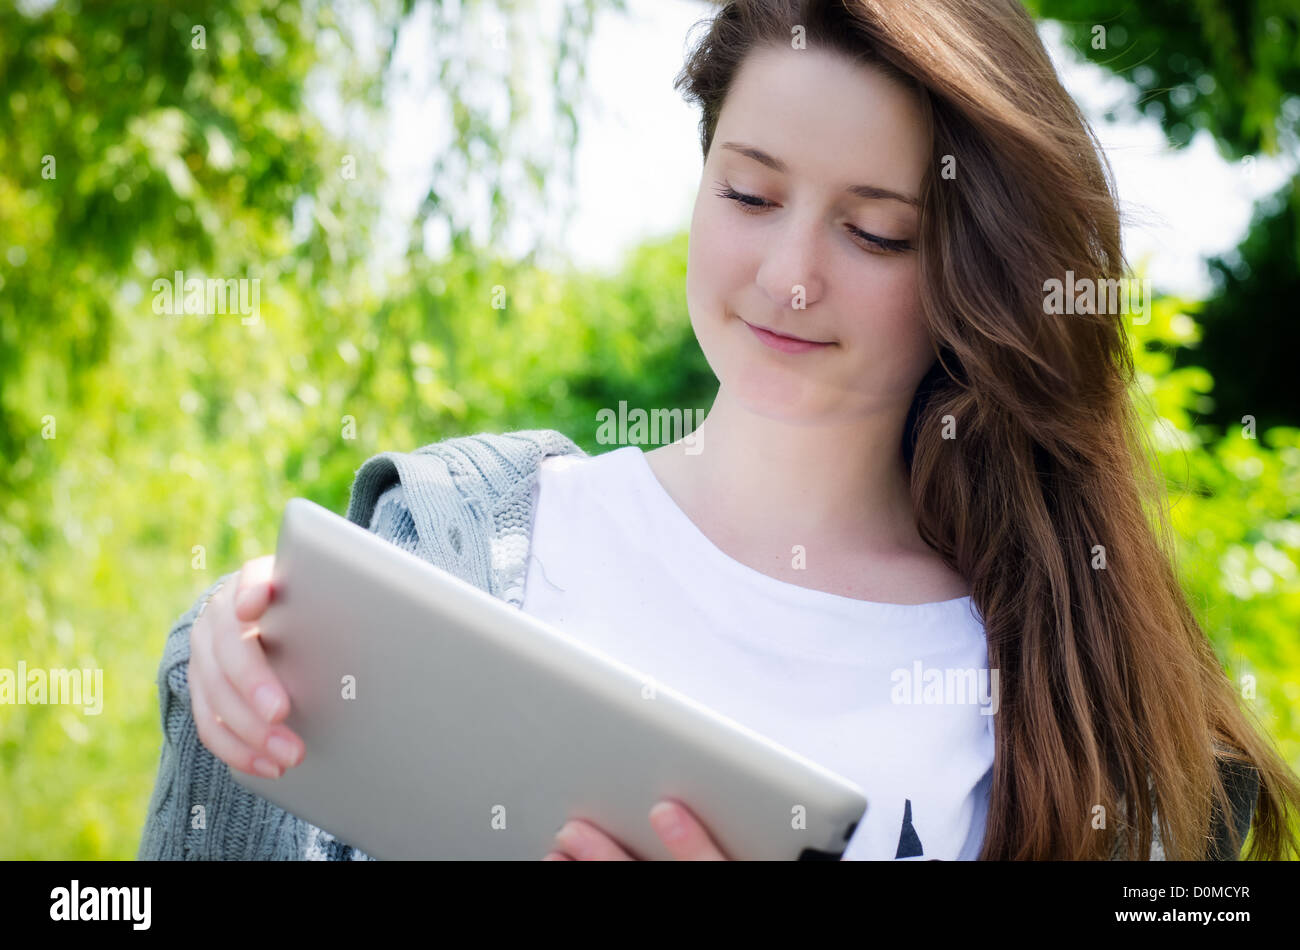 Low angle view of an attractive casual young woman working on a touch screen tablet in the park Stock Photo